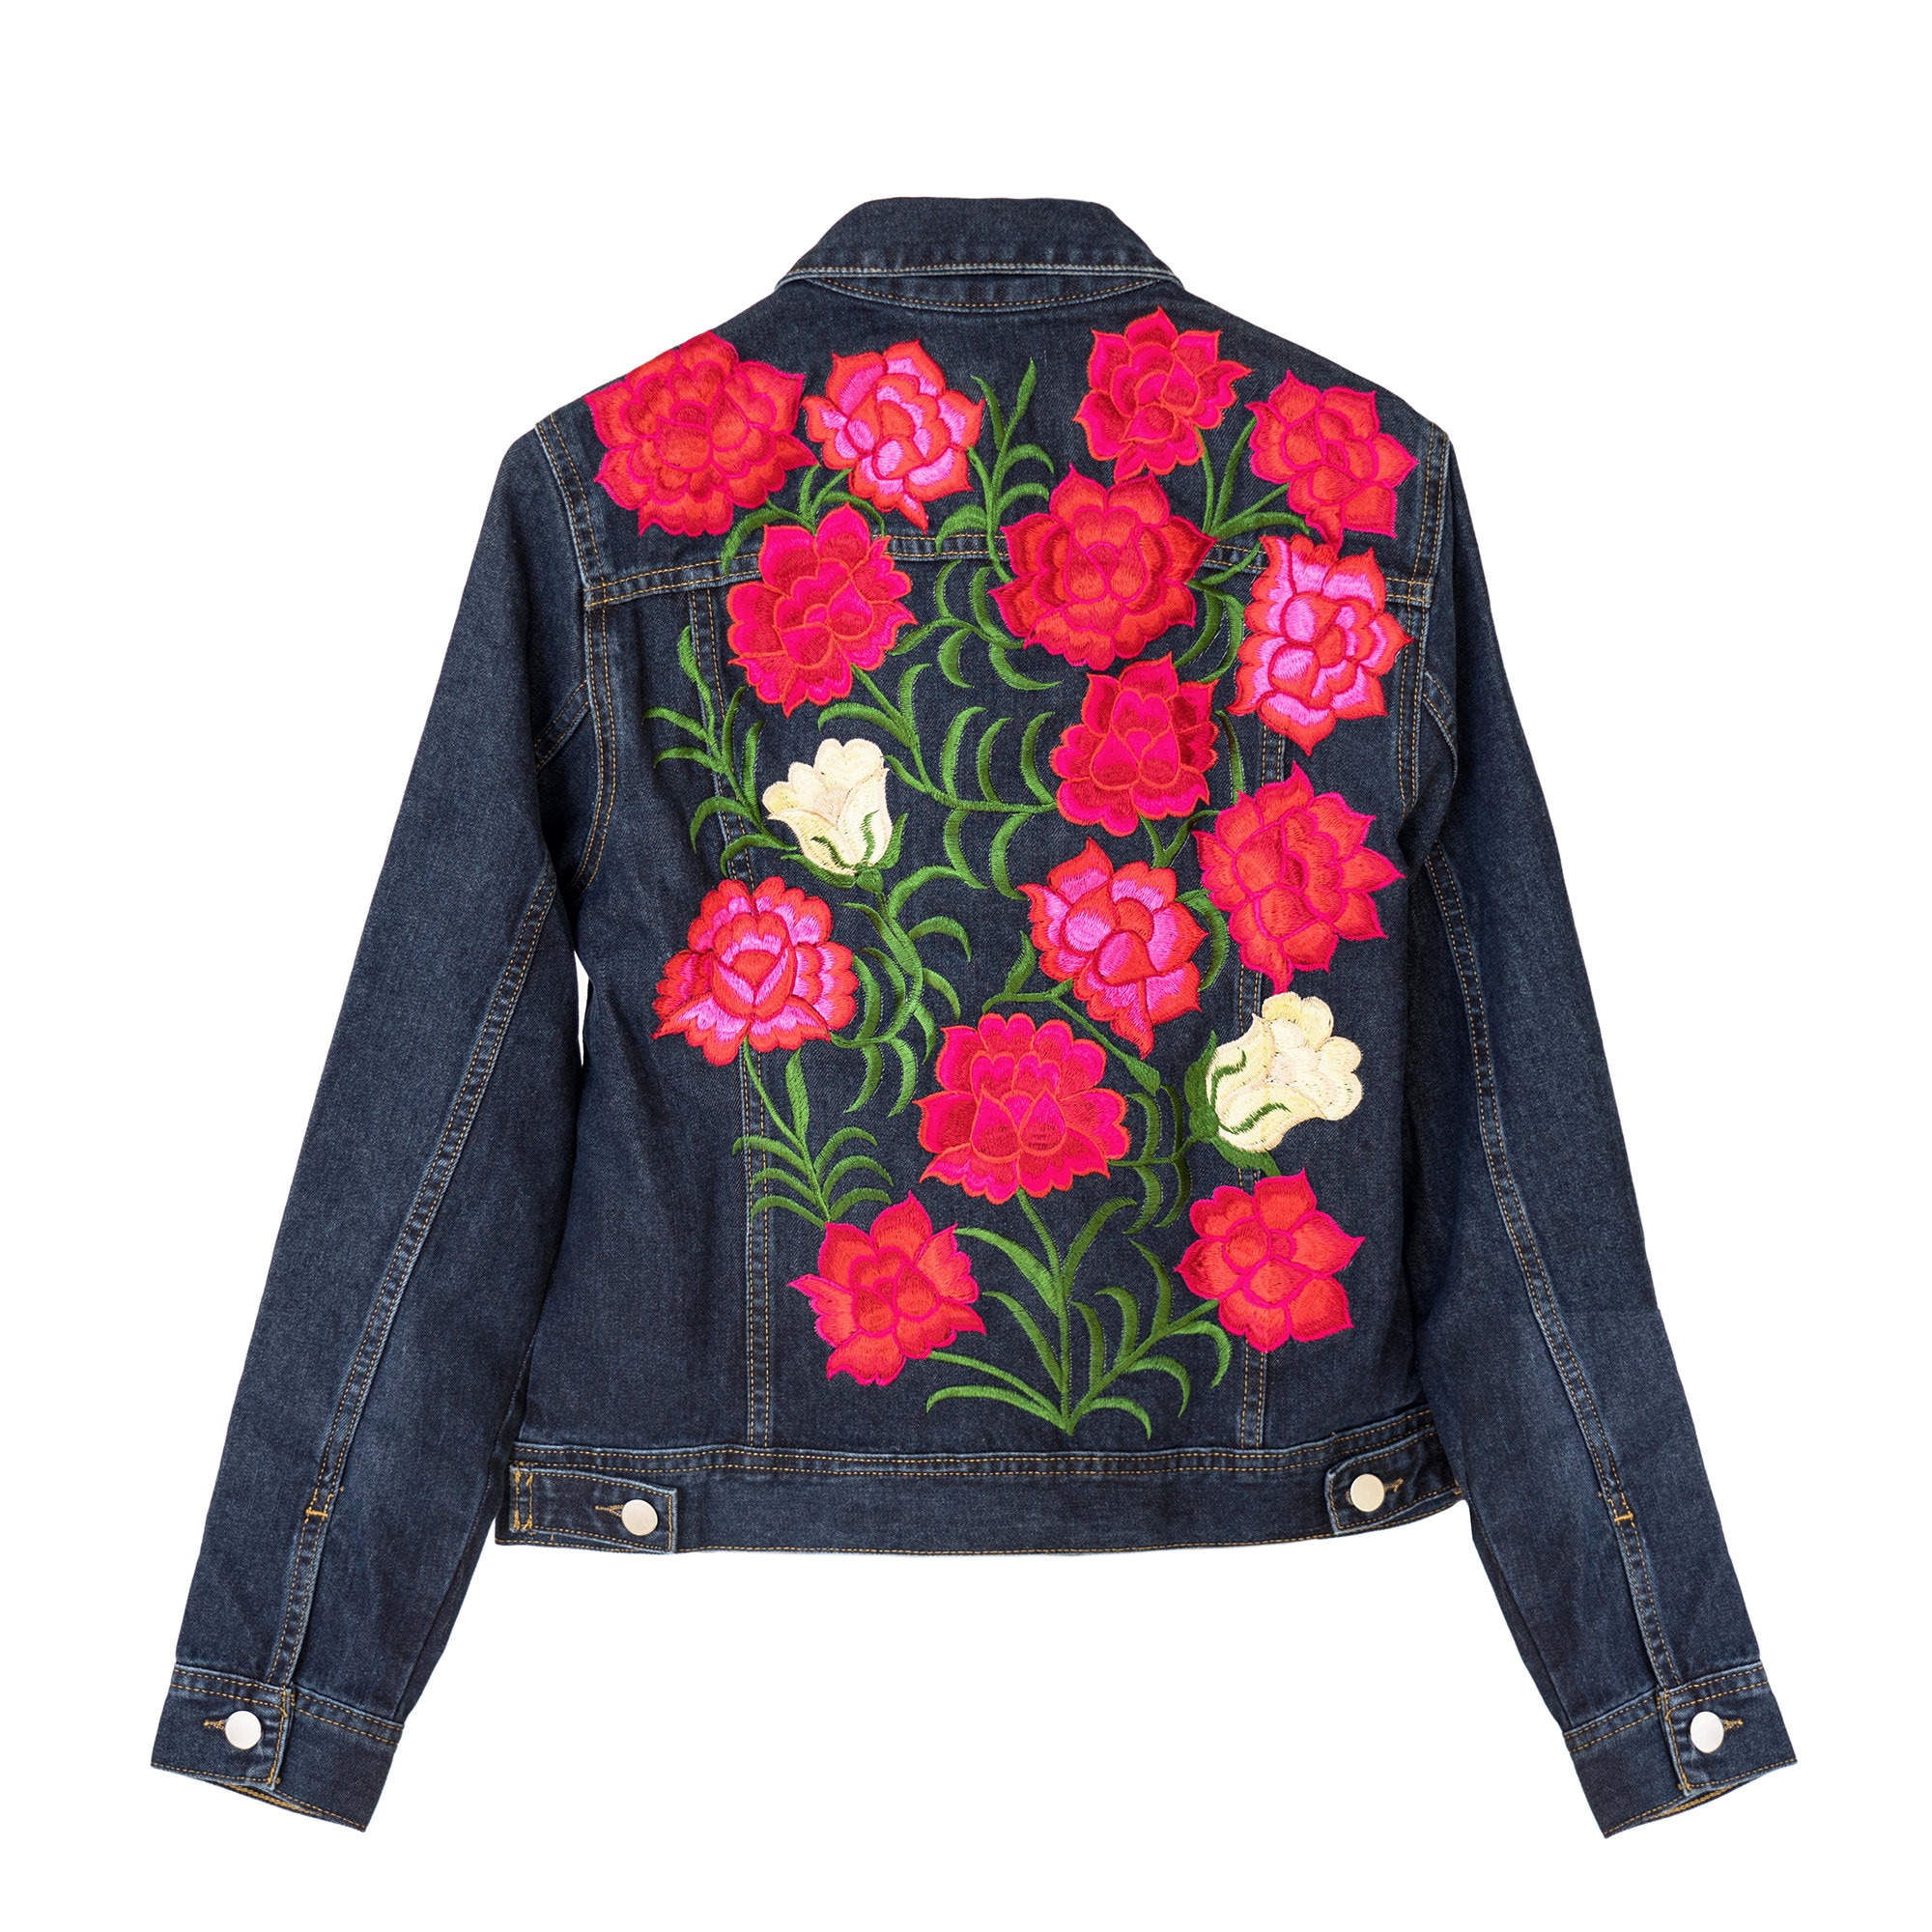 Mexican Floral Embroidery Jean Jacket Vintage Handmade Boho - Etsy